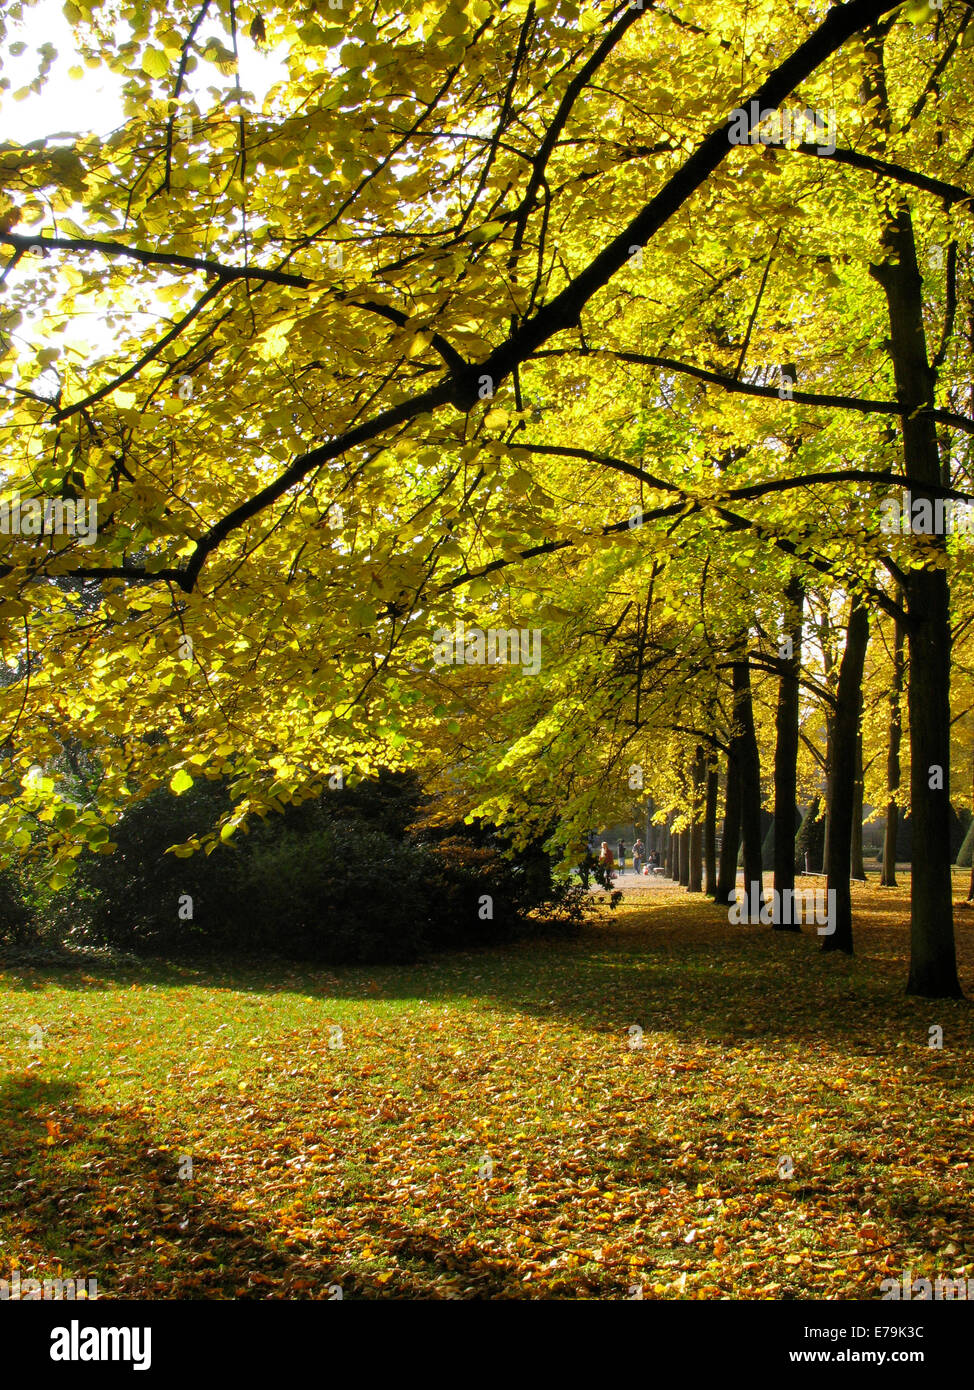 Colorful are the autumn leaves on the various trees in the French Garden of Celle. The park is a utility and pleasure garden in the court yard tradition of the early 17th century. Photo: Klaus Nowottnick Date: October 31, 2011 Stock Photo